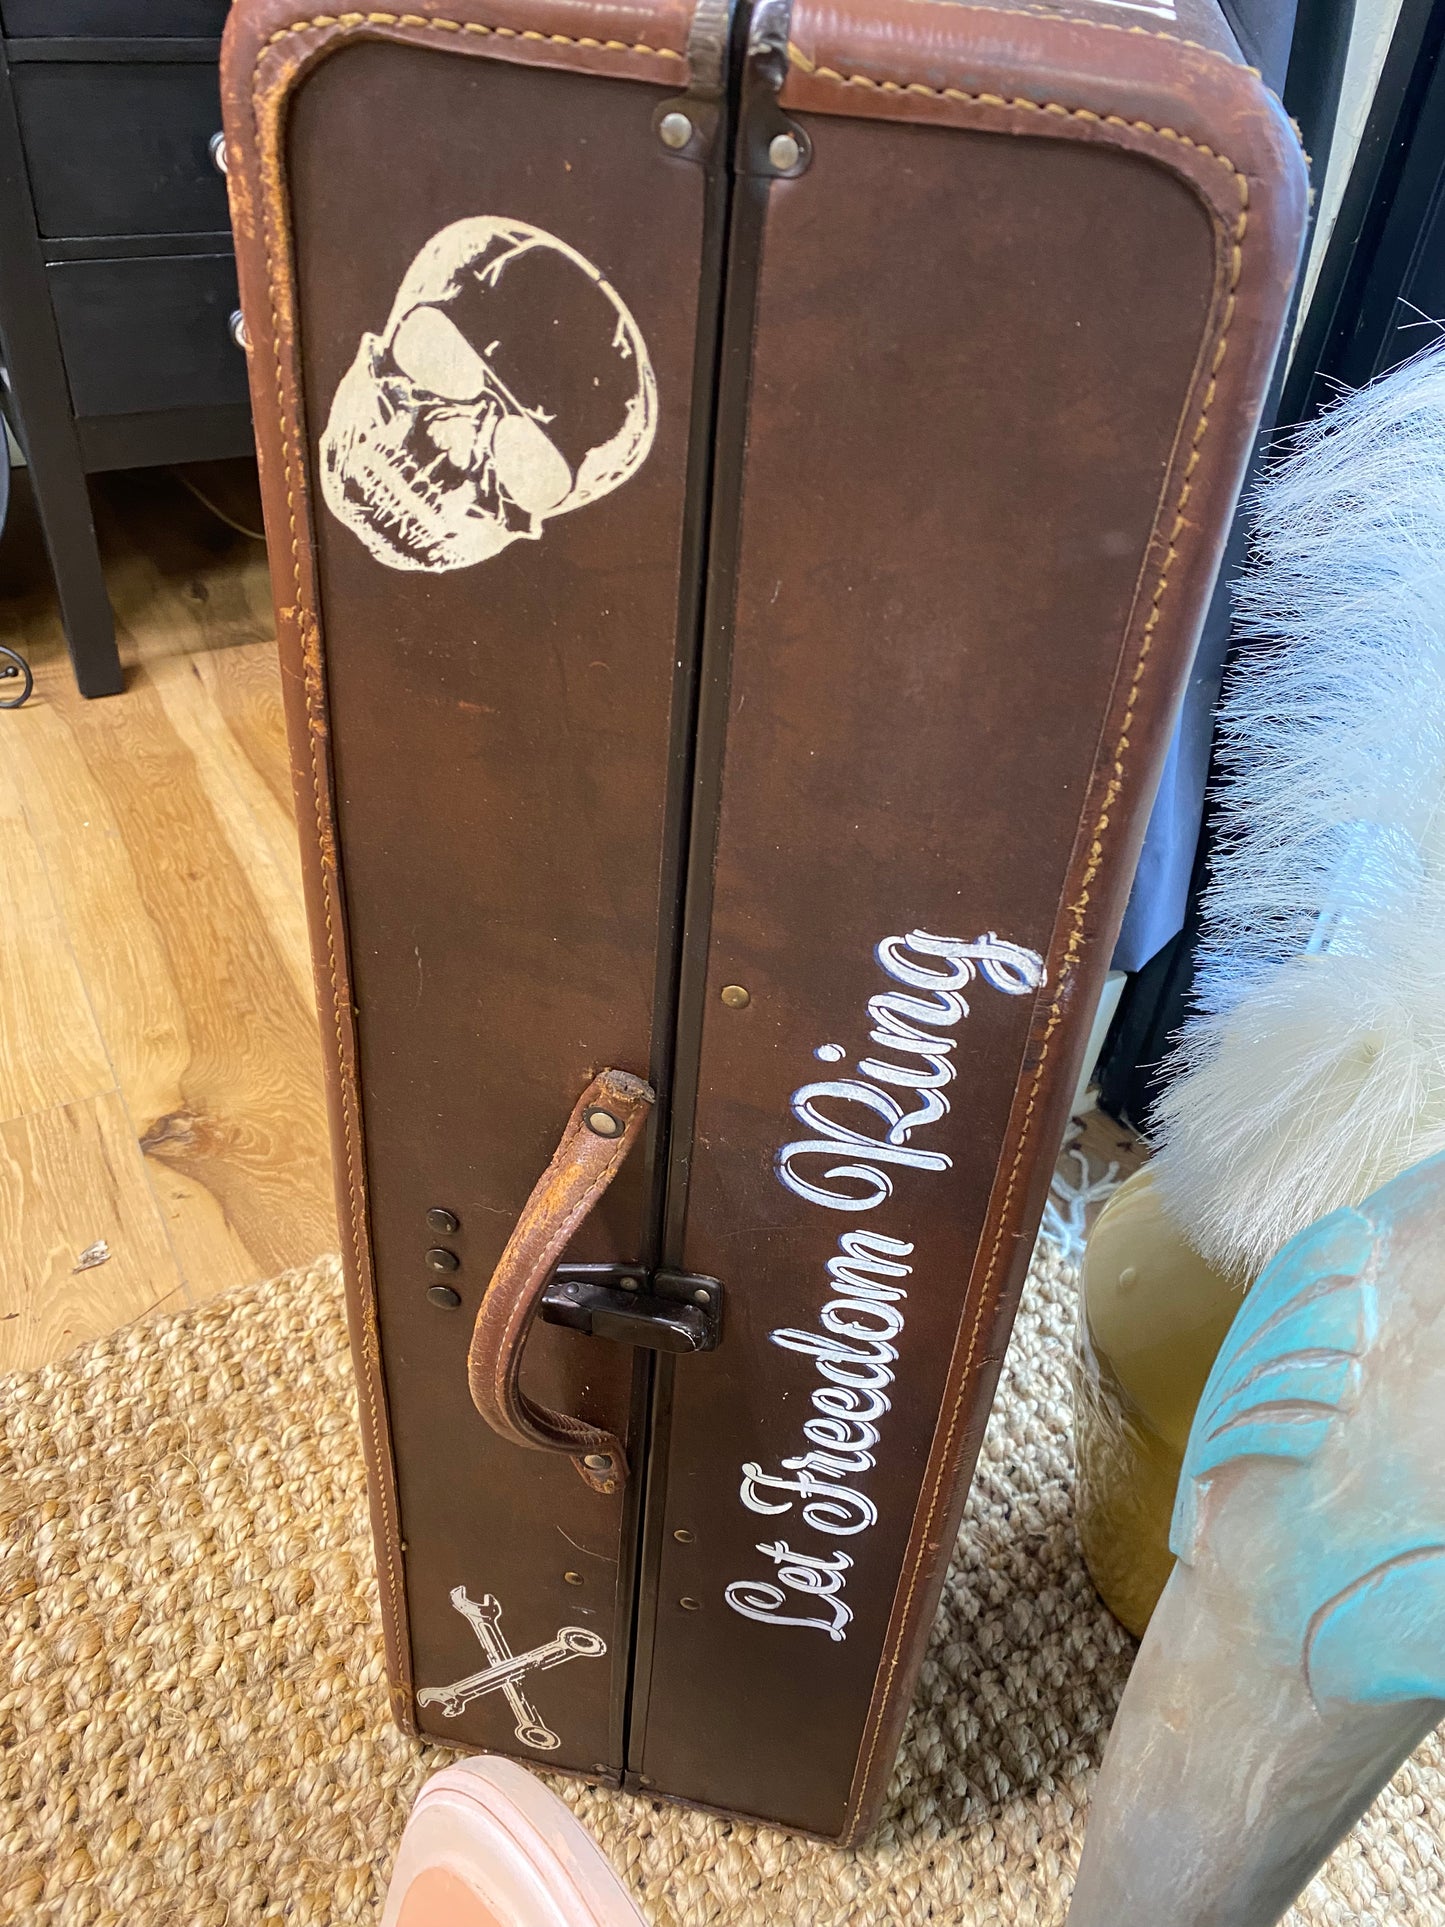 Vintage English Leather Steamer Trunk Travel Suitcase with Motorcycle Themed Transfers